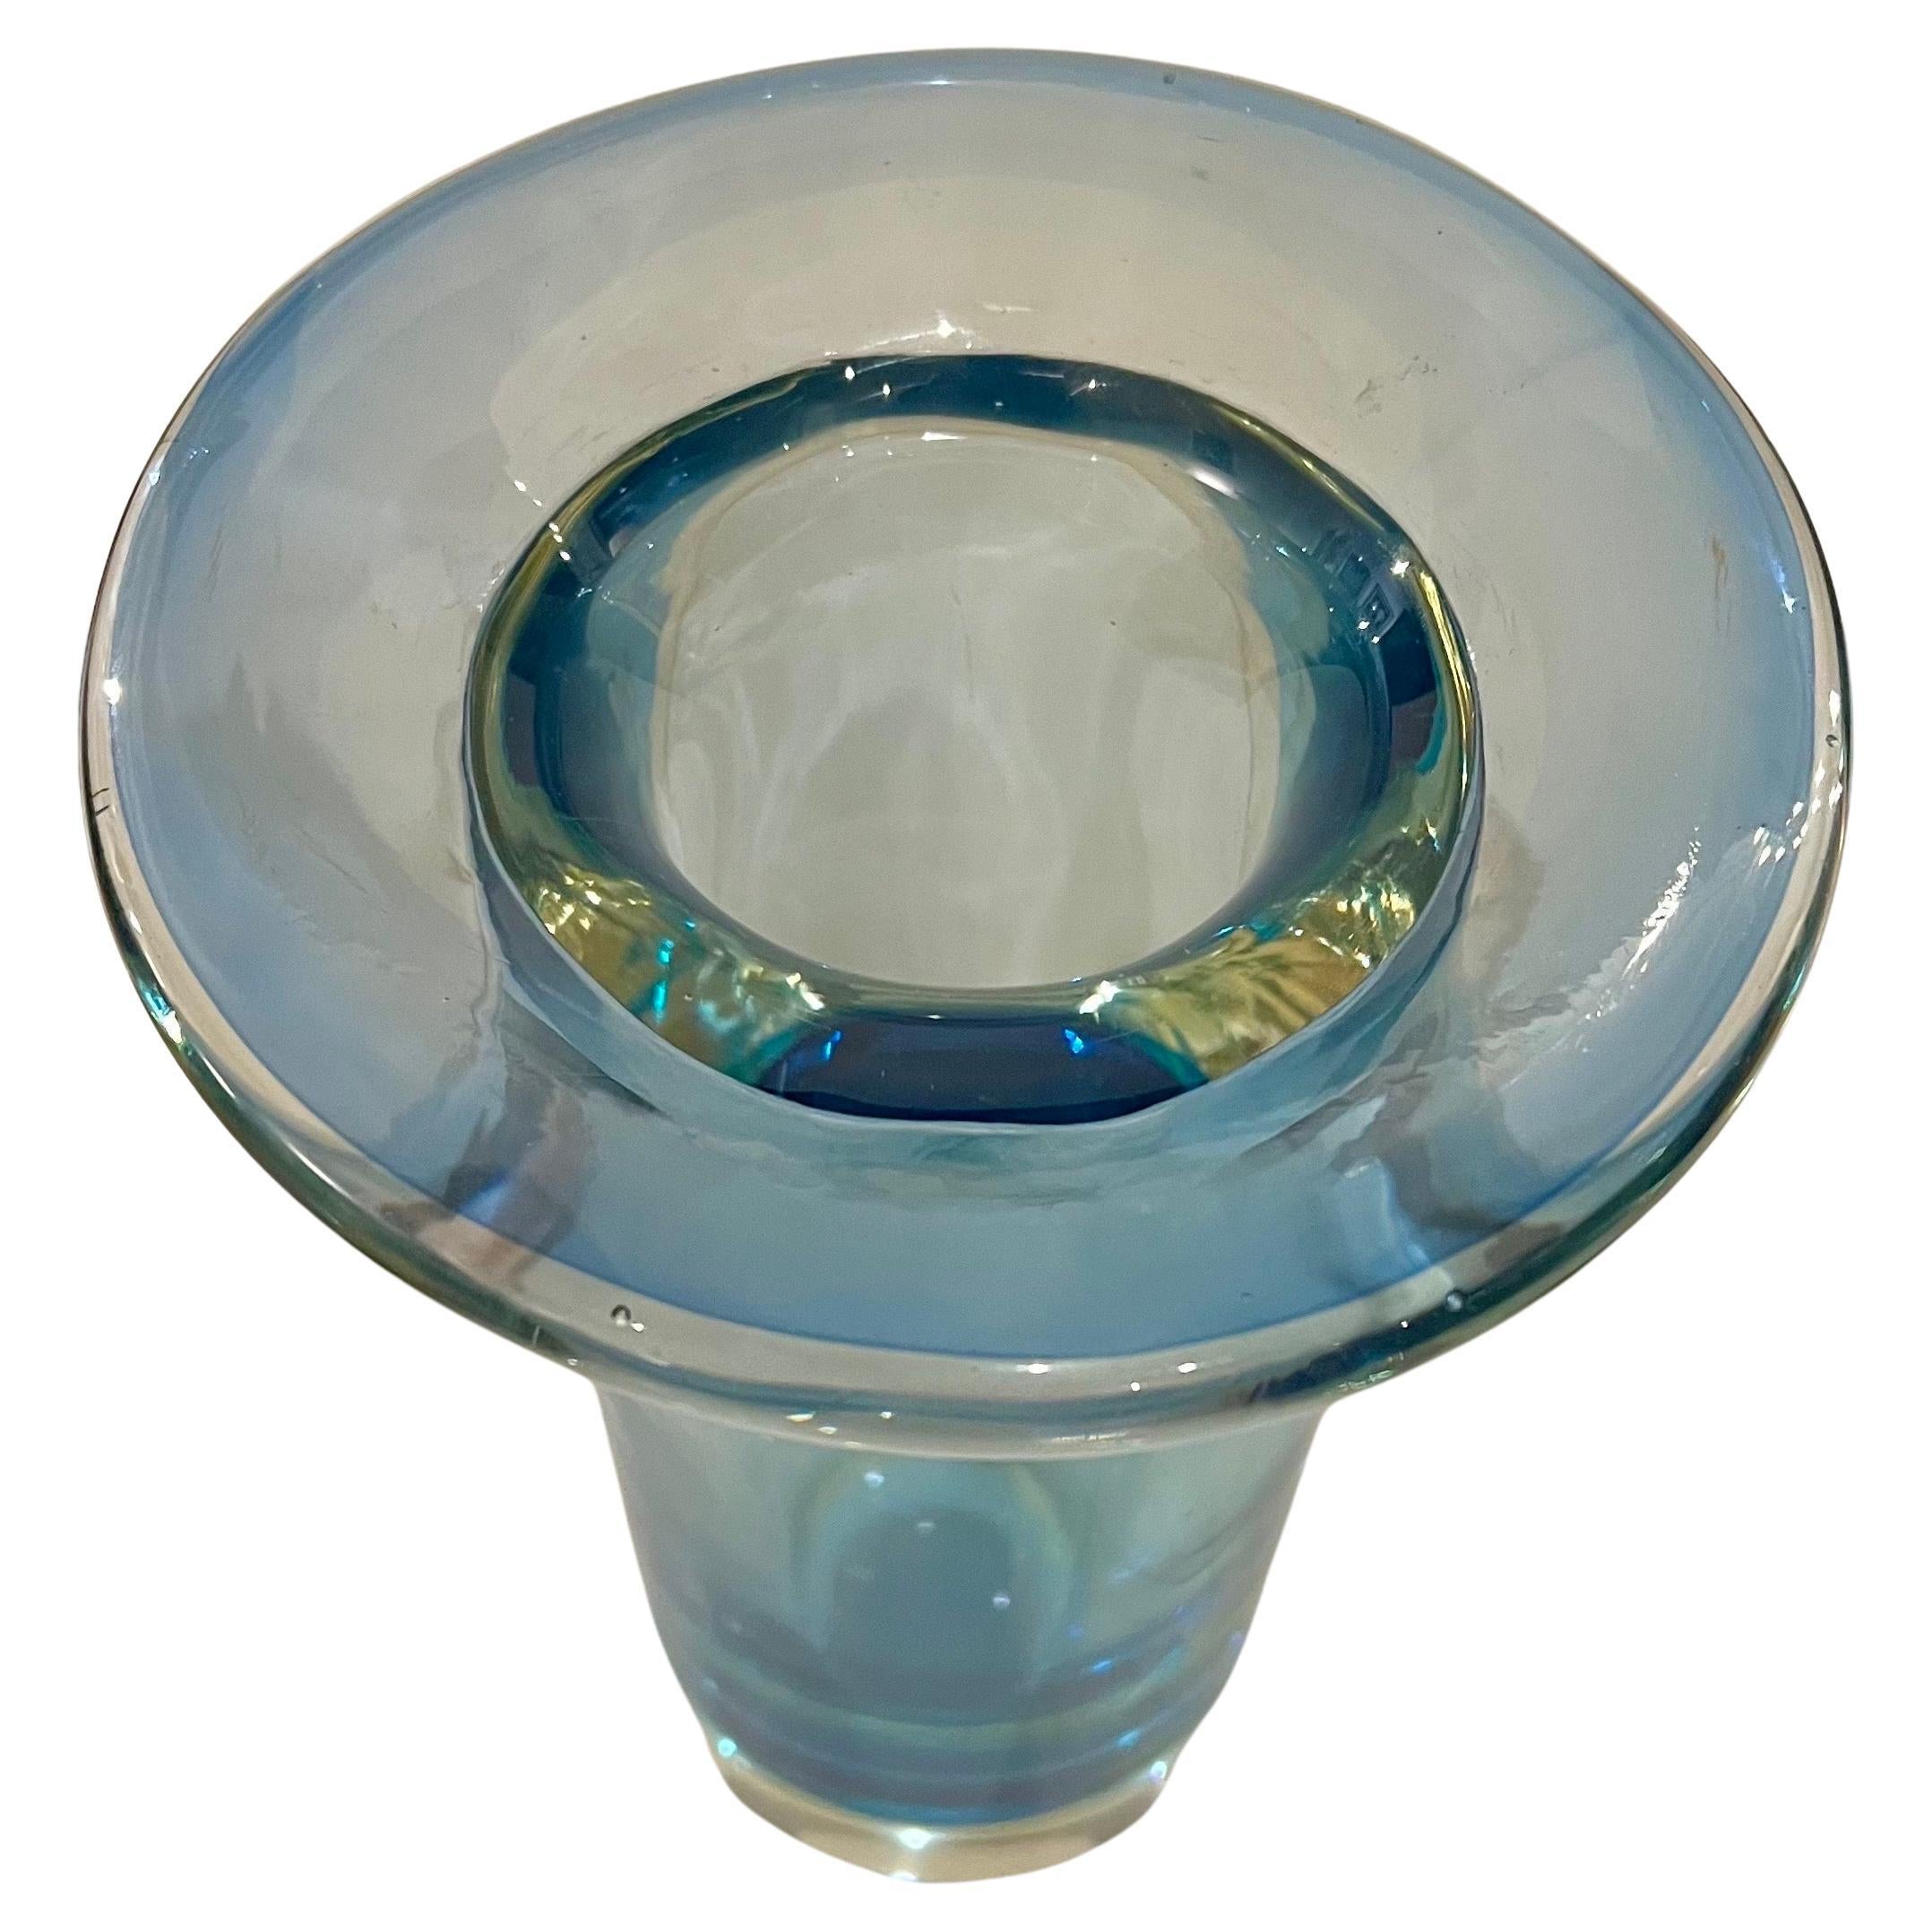 Majestic sommerso blue glass vase , nice colors thick heavy and in excellent condition circa 1970's Murano Italy , great for Mid Century Space age home decor.